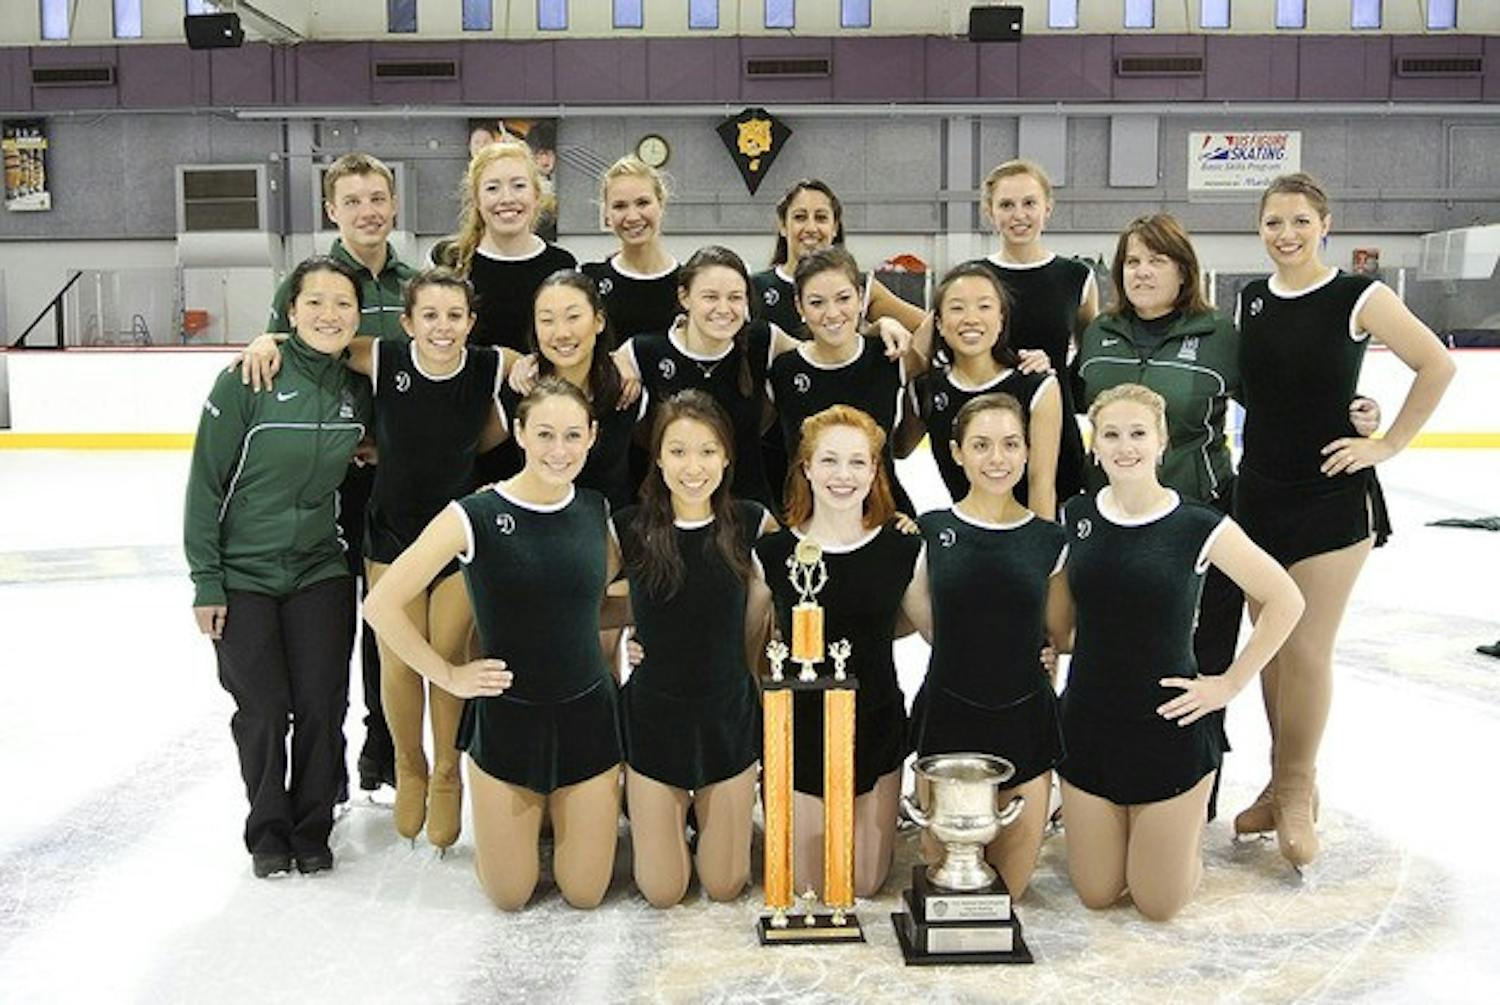 The figure skating team won its sixth title at the national championships in Colorado Springs, Colo. this weekend